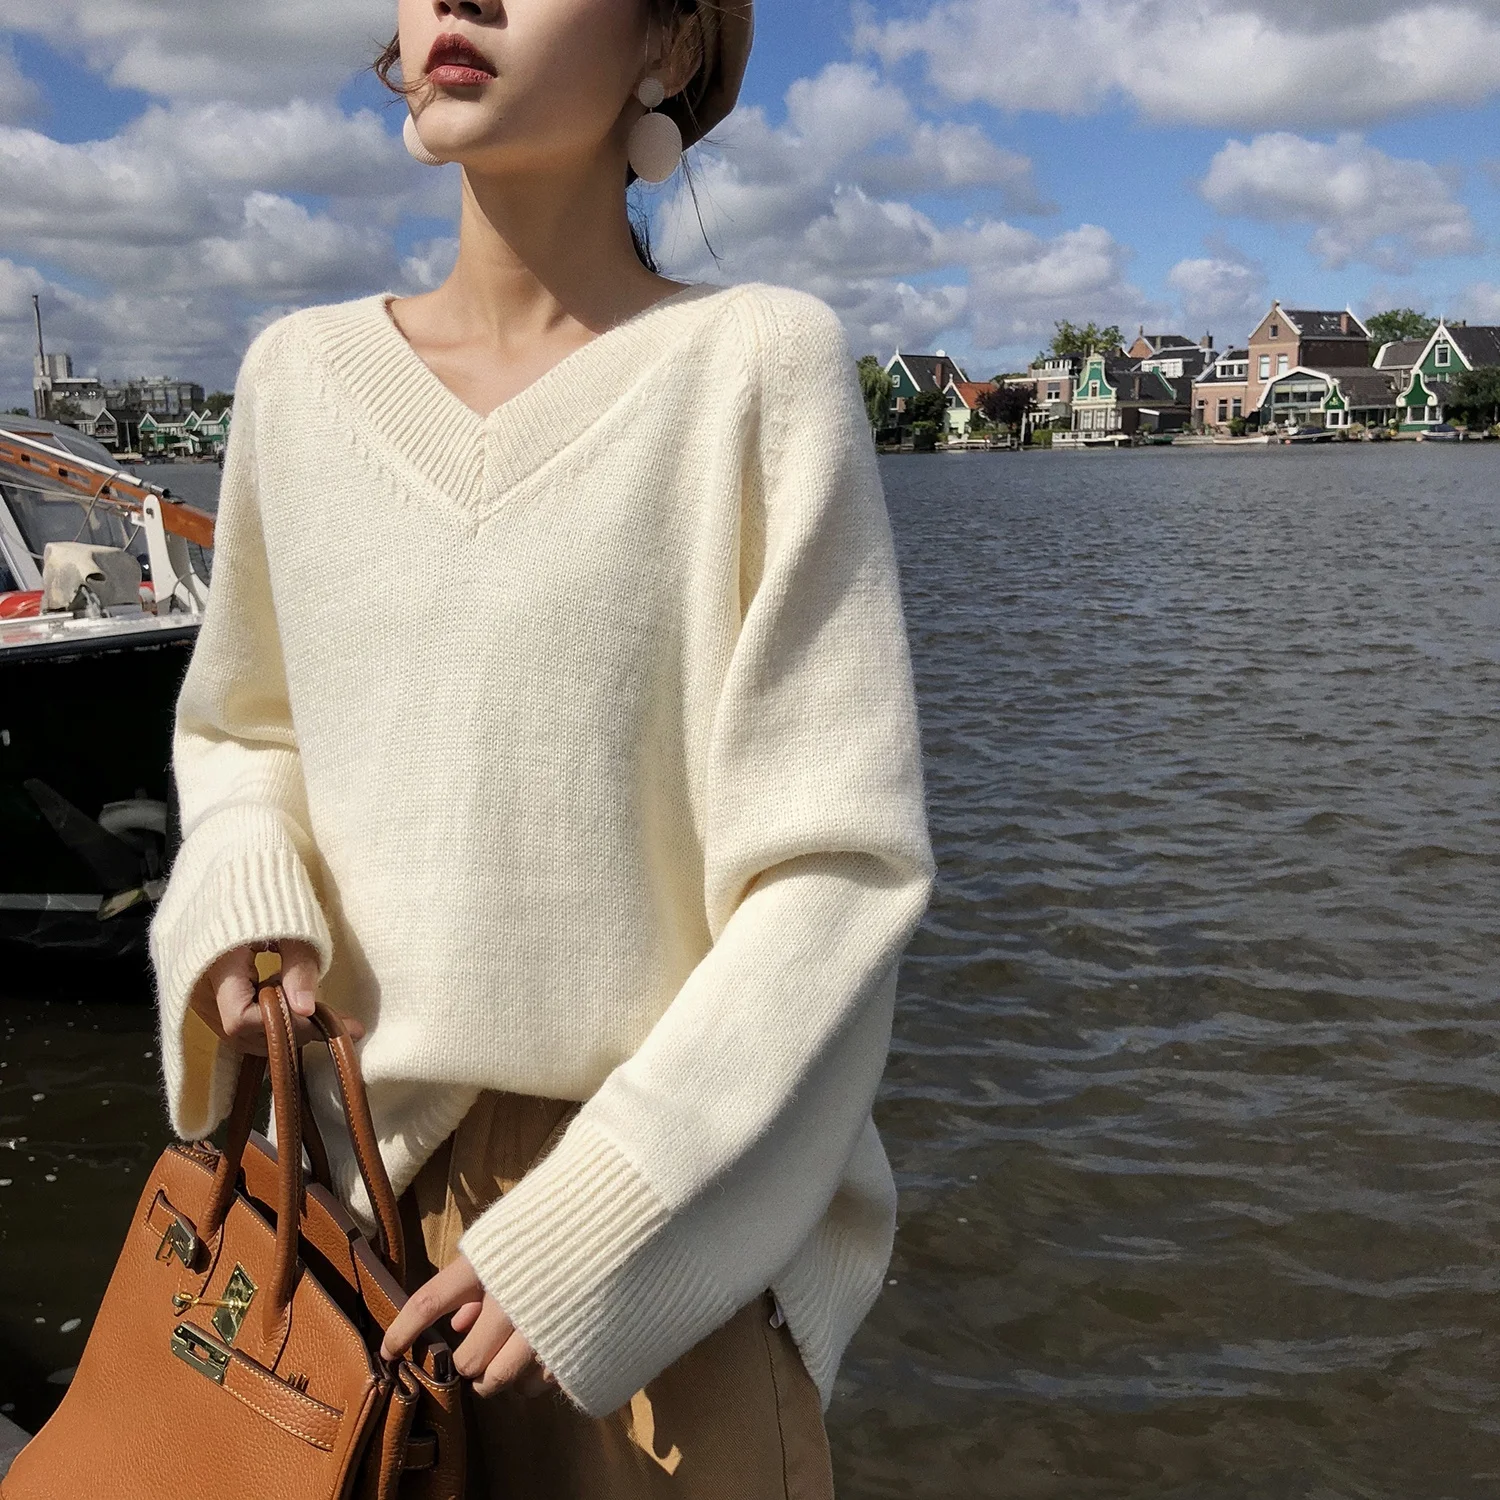 

Factory Outlet High-quality 2019 New Arrivals Winter Fashion Long Sleeve Women Knitwear Sweater Pullover